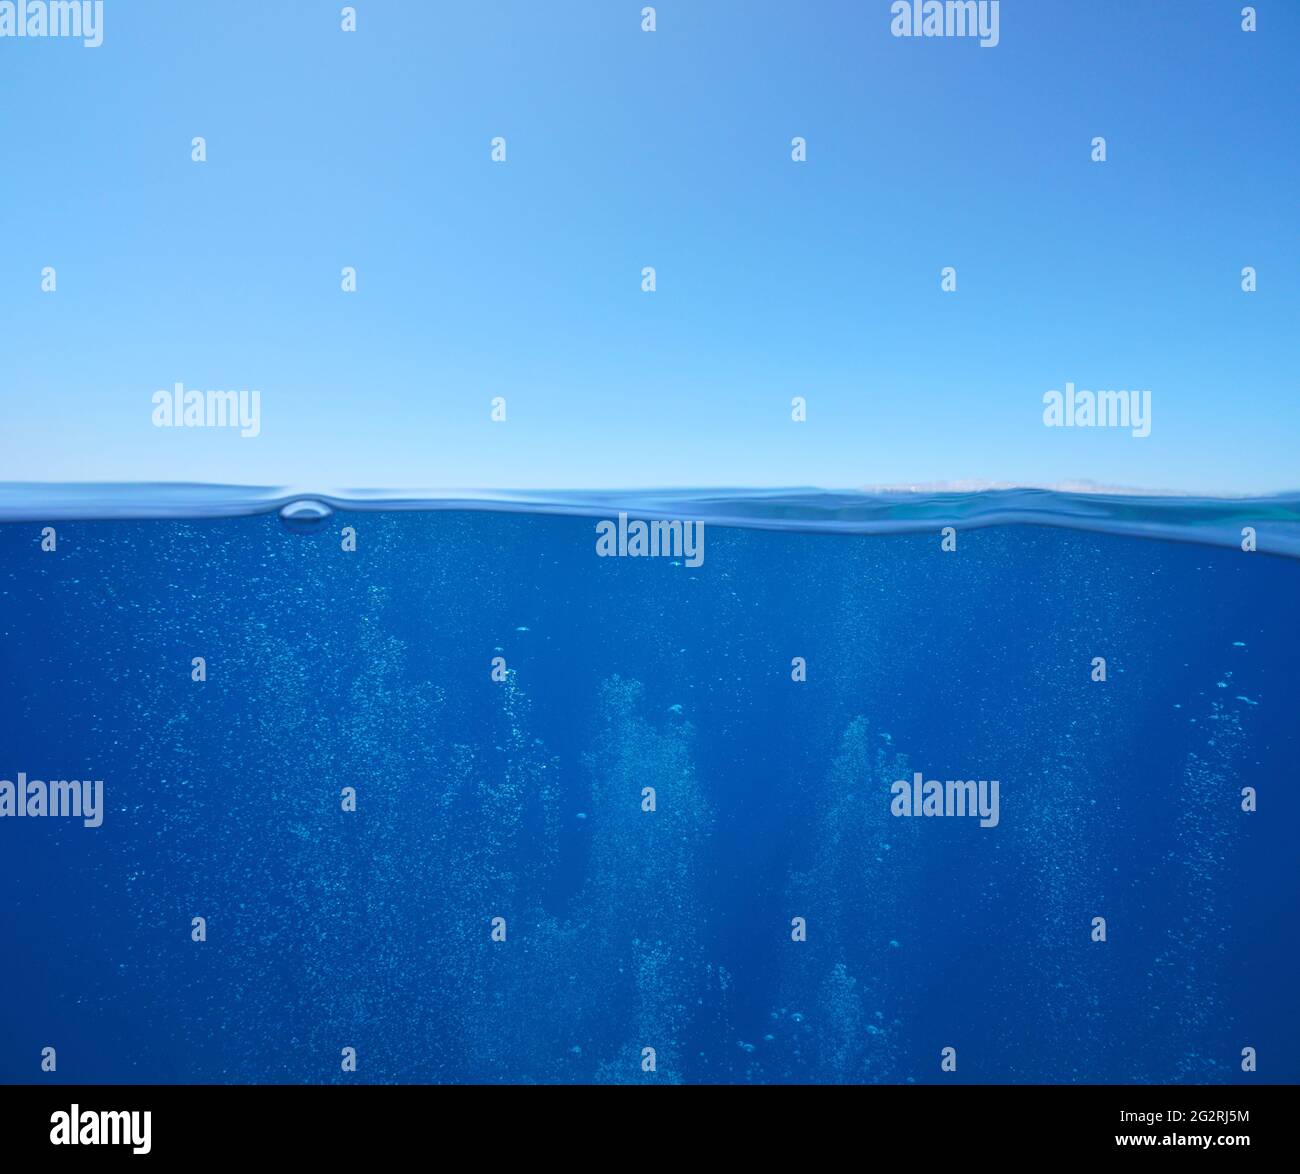 Blue sky with air bubbles underwater sea, split view over and under water surface, Mediterranean sea Stock Photo